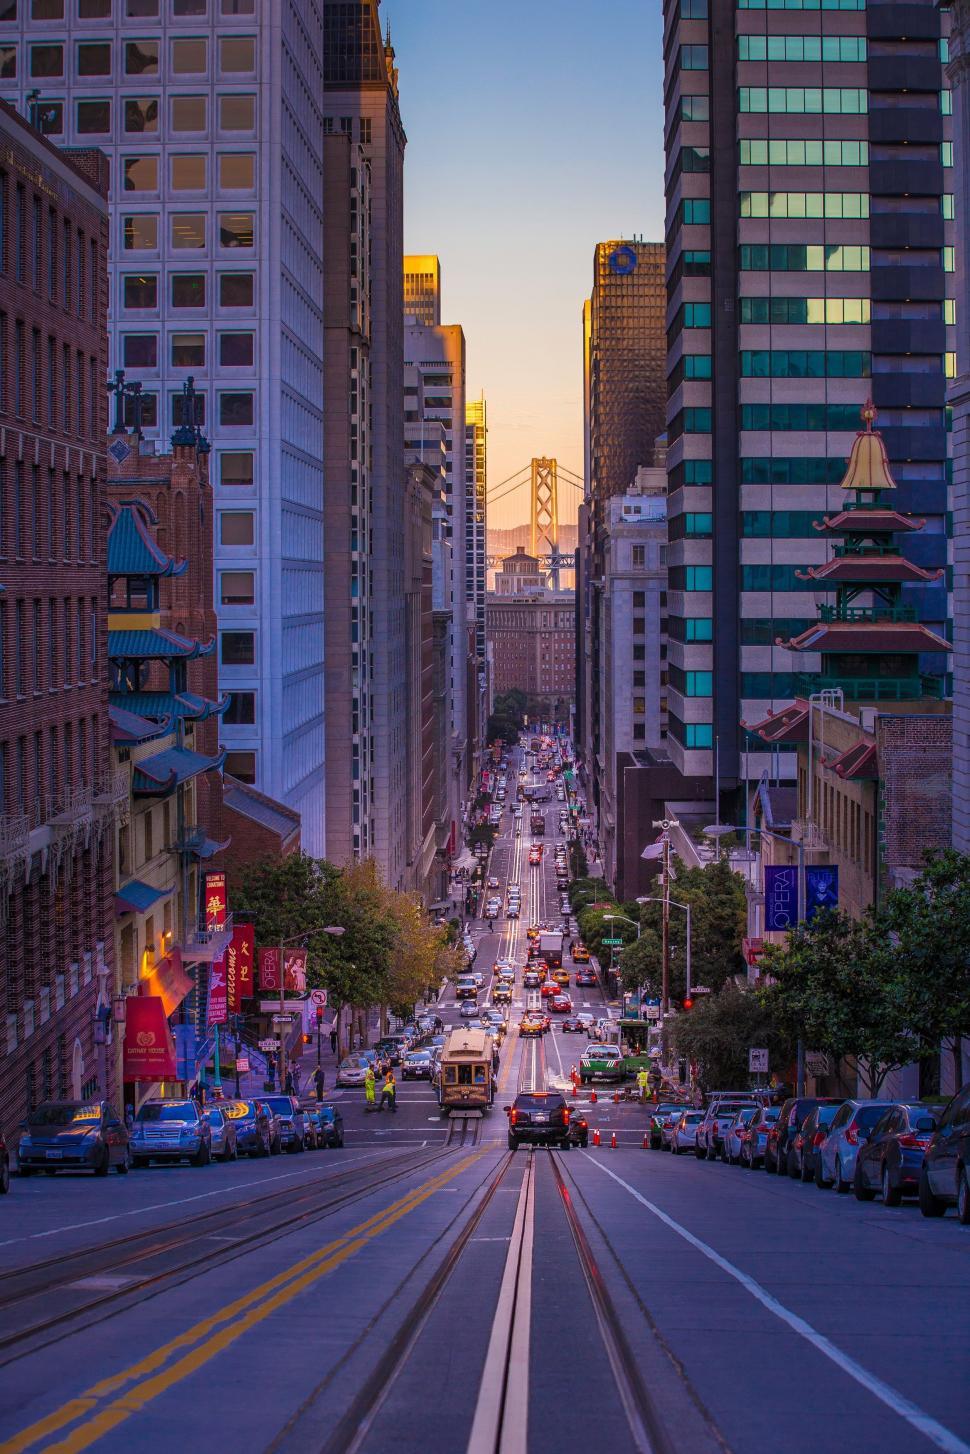 Free Image of City Street Lined With Tall Buildings 